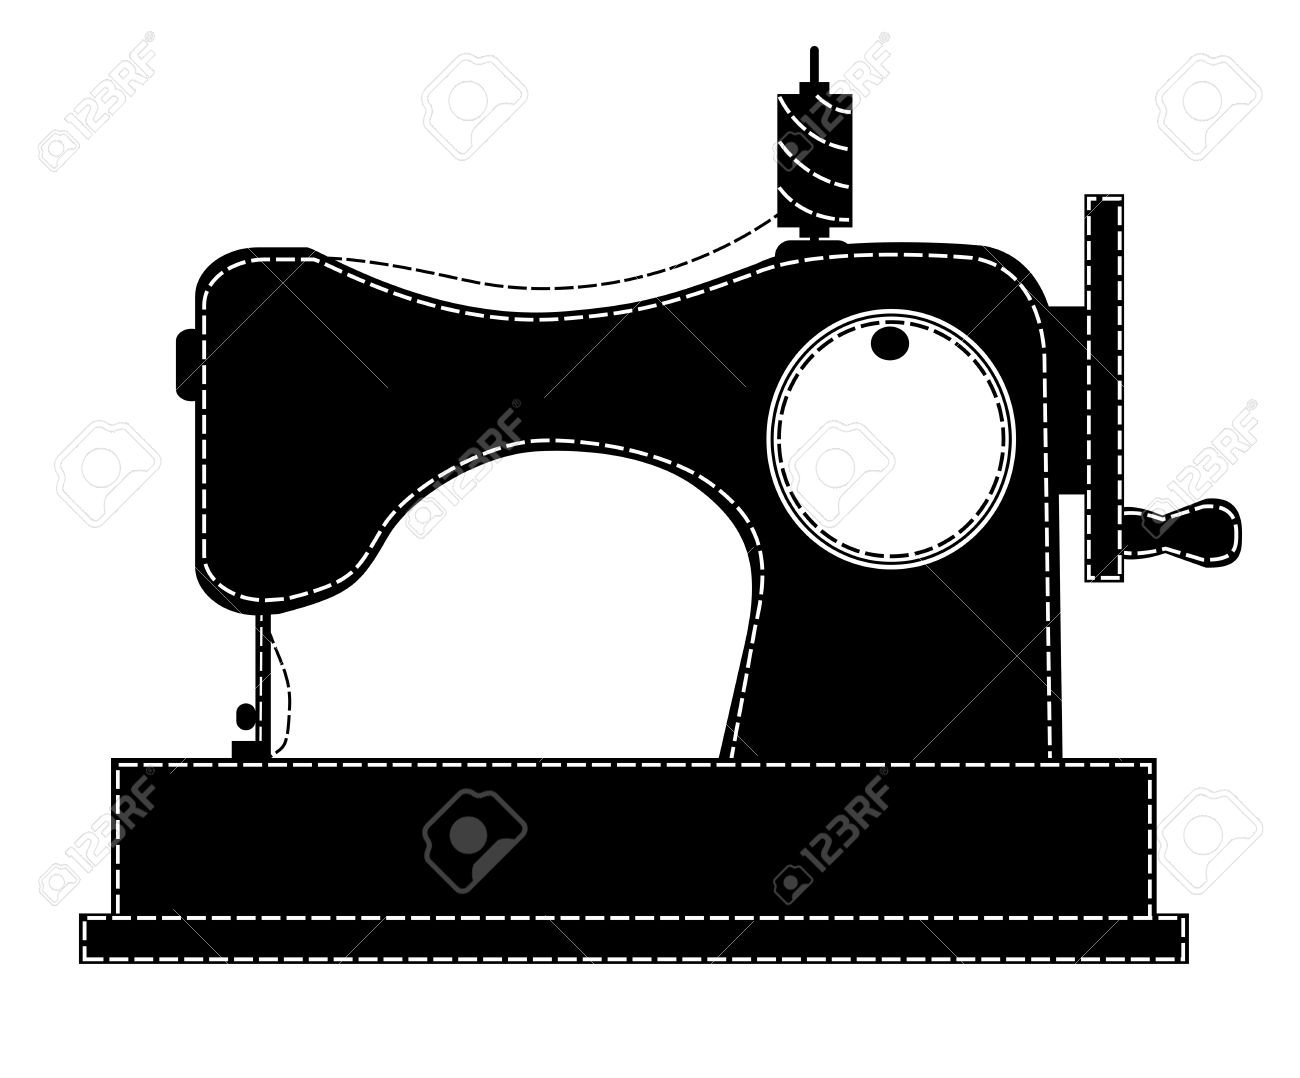 Silhouette of the sewing machine » Clipart Station.